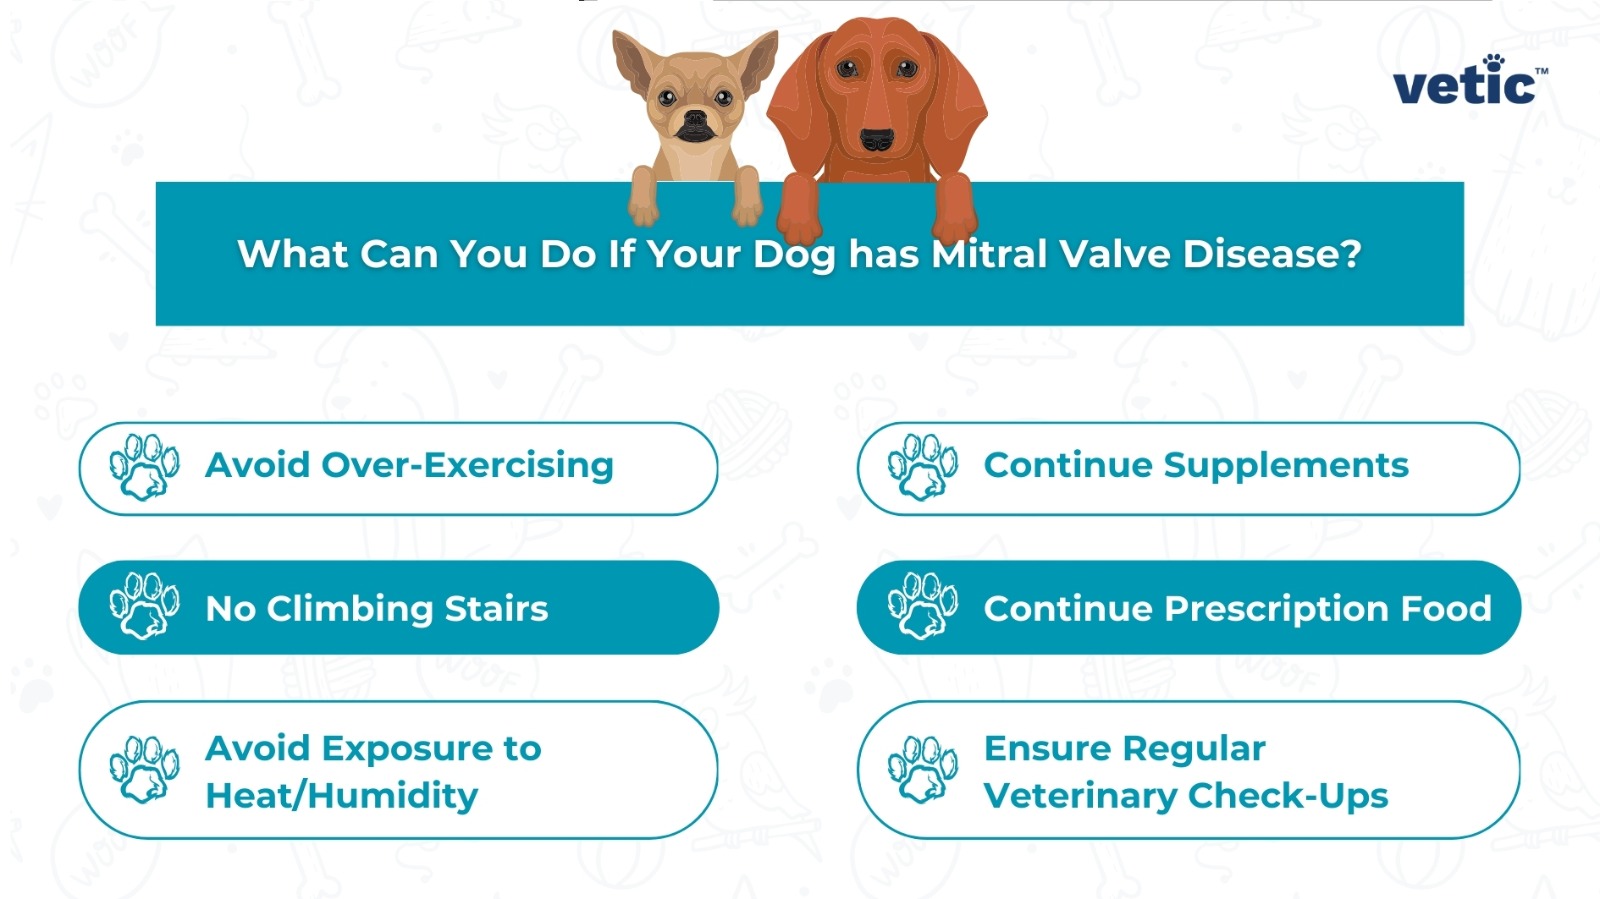 an infographic branded by Vetic on "What can you do if your dog has mitral valve disease" mitral valve disease in dogs is a degenerative condition that requires plenty of care, such as, avoiding over exercising, avoiding humidity and heat, no climbing stairs, continuing prescription food, supplements and medication, and ensuring regular veterinary check-ups